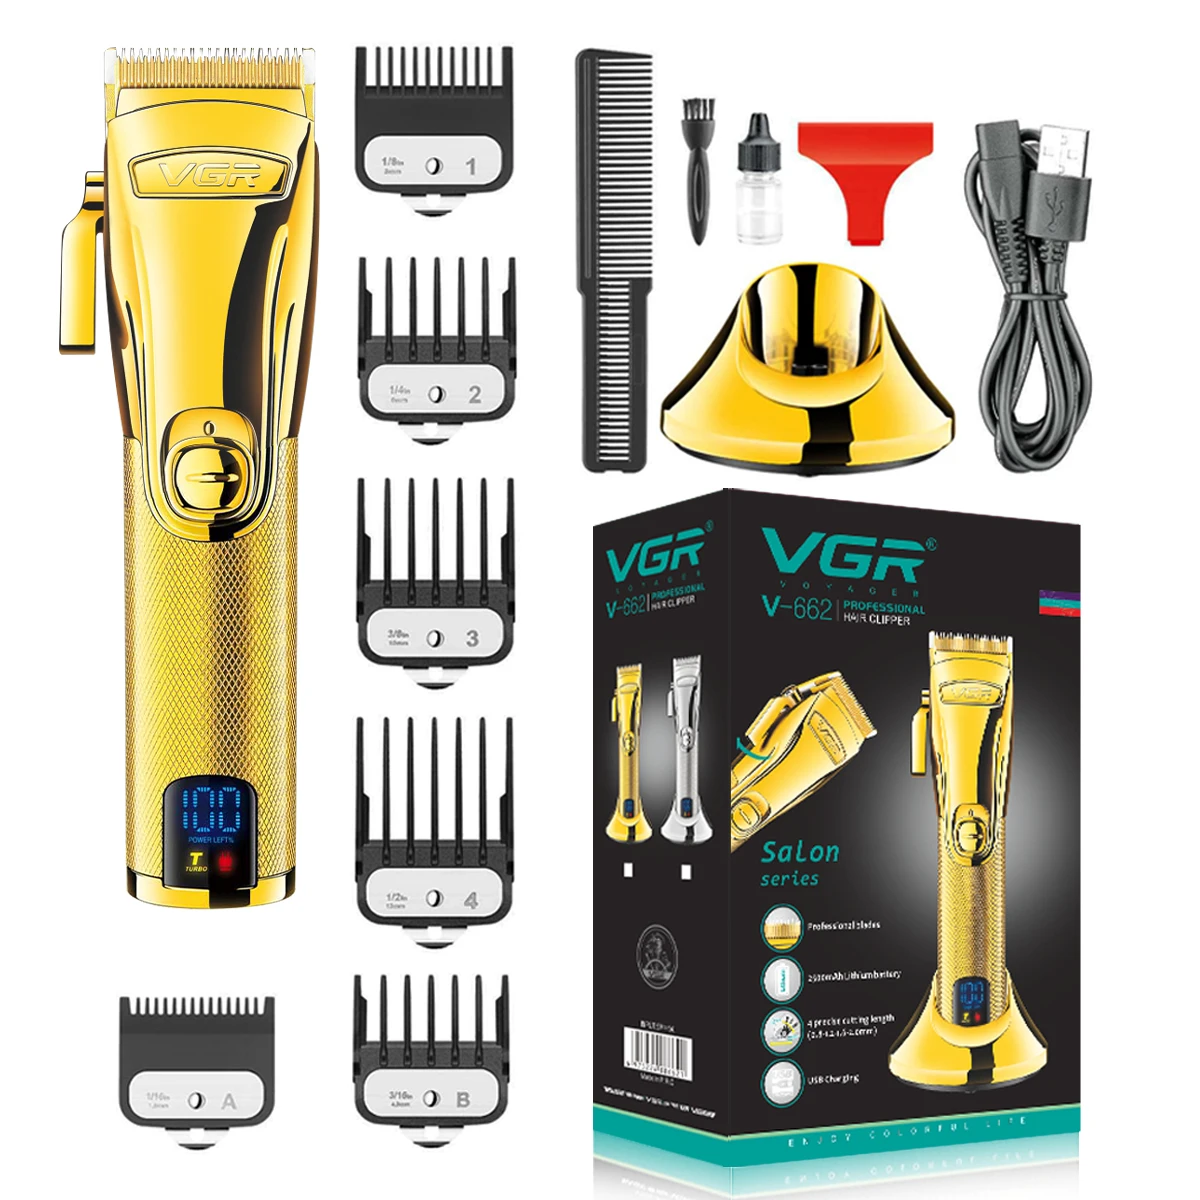 

VGR V-662 Metal Electric Cordless Hair Trimmer Professional Rechargeable Best Barber Hair Clipper with Charging Base